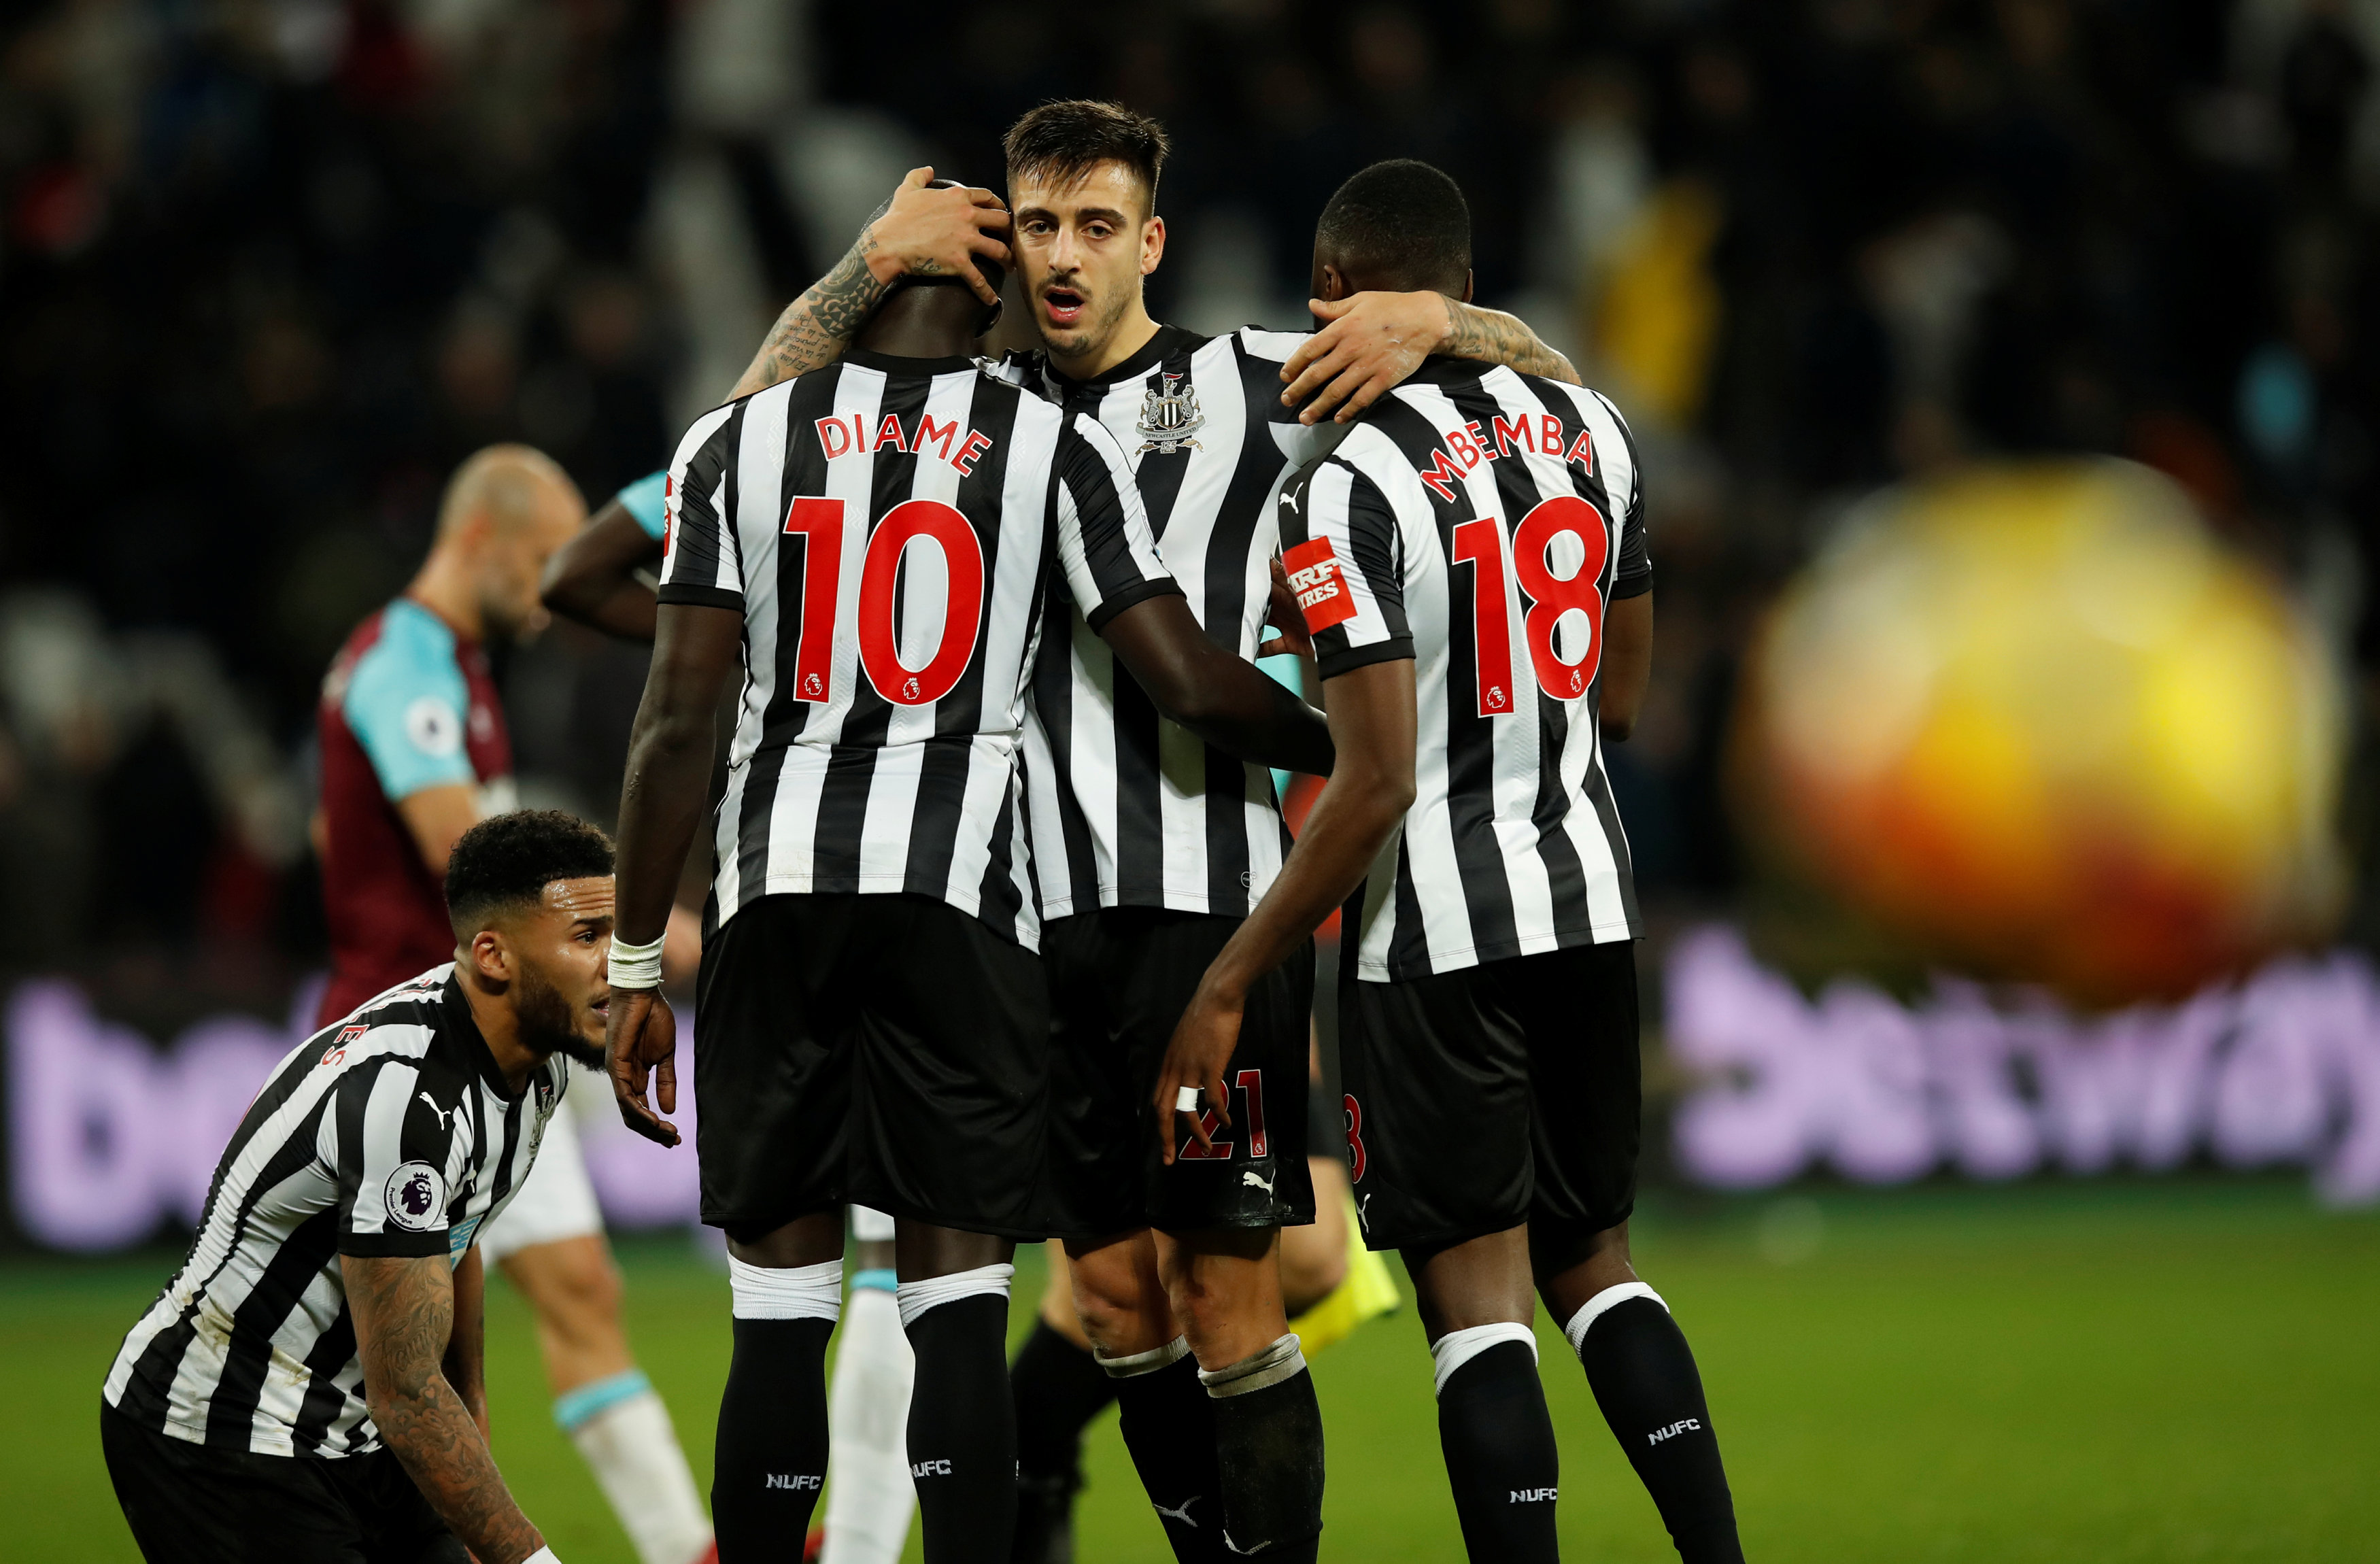 Football: Newcastle end losing streak with win at West Ham